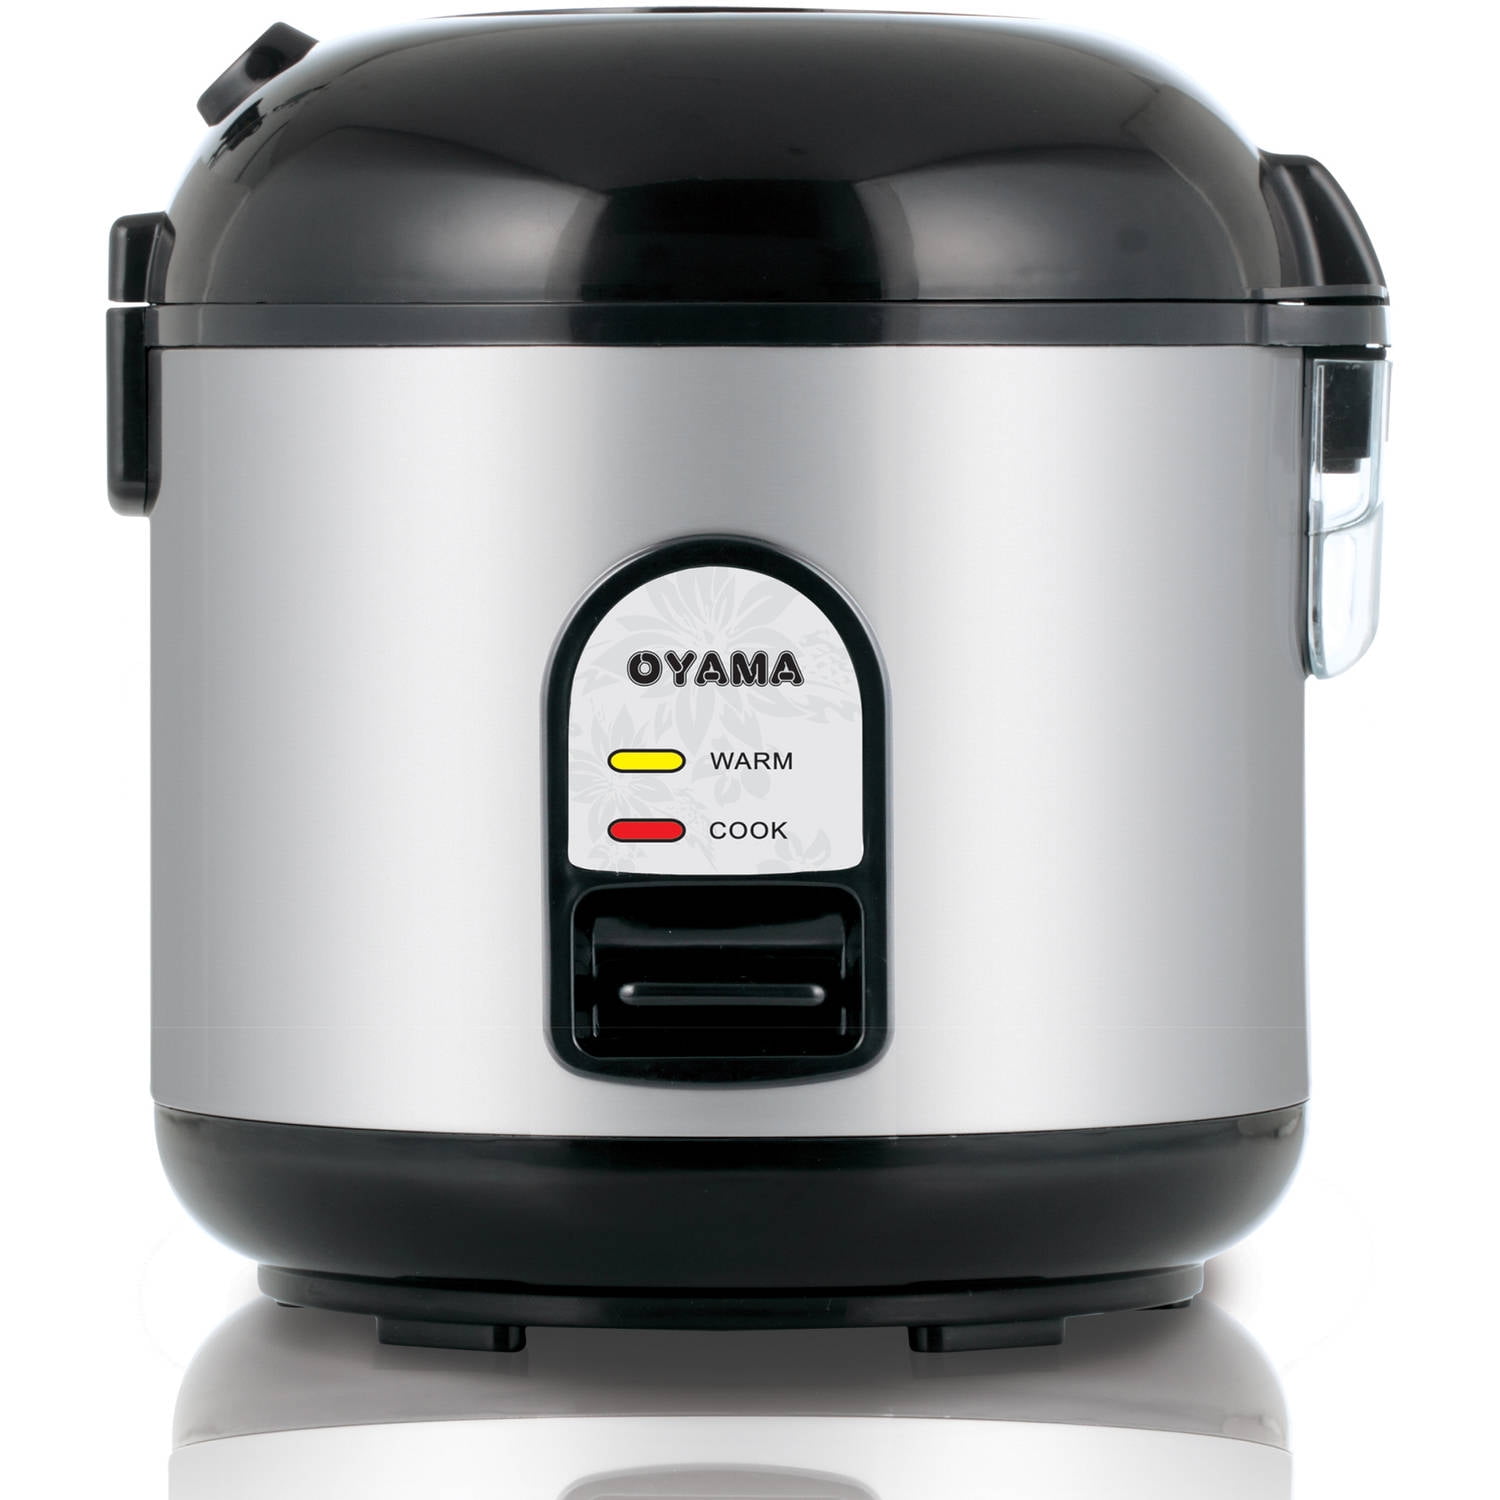 Oyama 5-Cup All Stainless-Steel Rice Cooker/Steamer/Warmer, Black Stainless Steel Rice Cooker Walmart